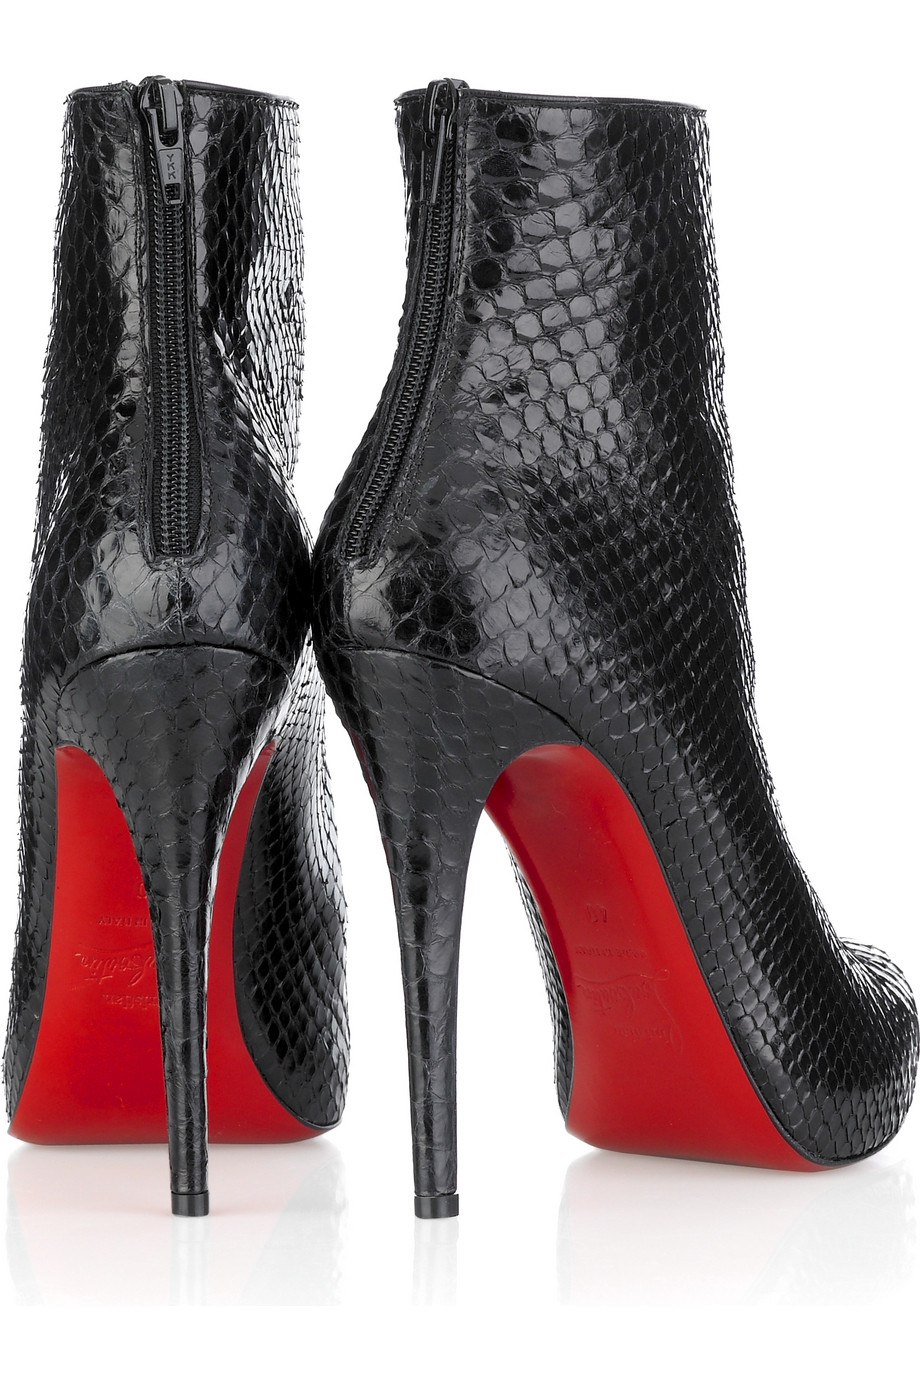 chaussures louboutin ancienne collection